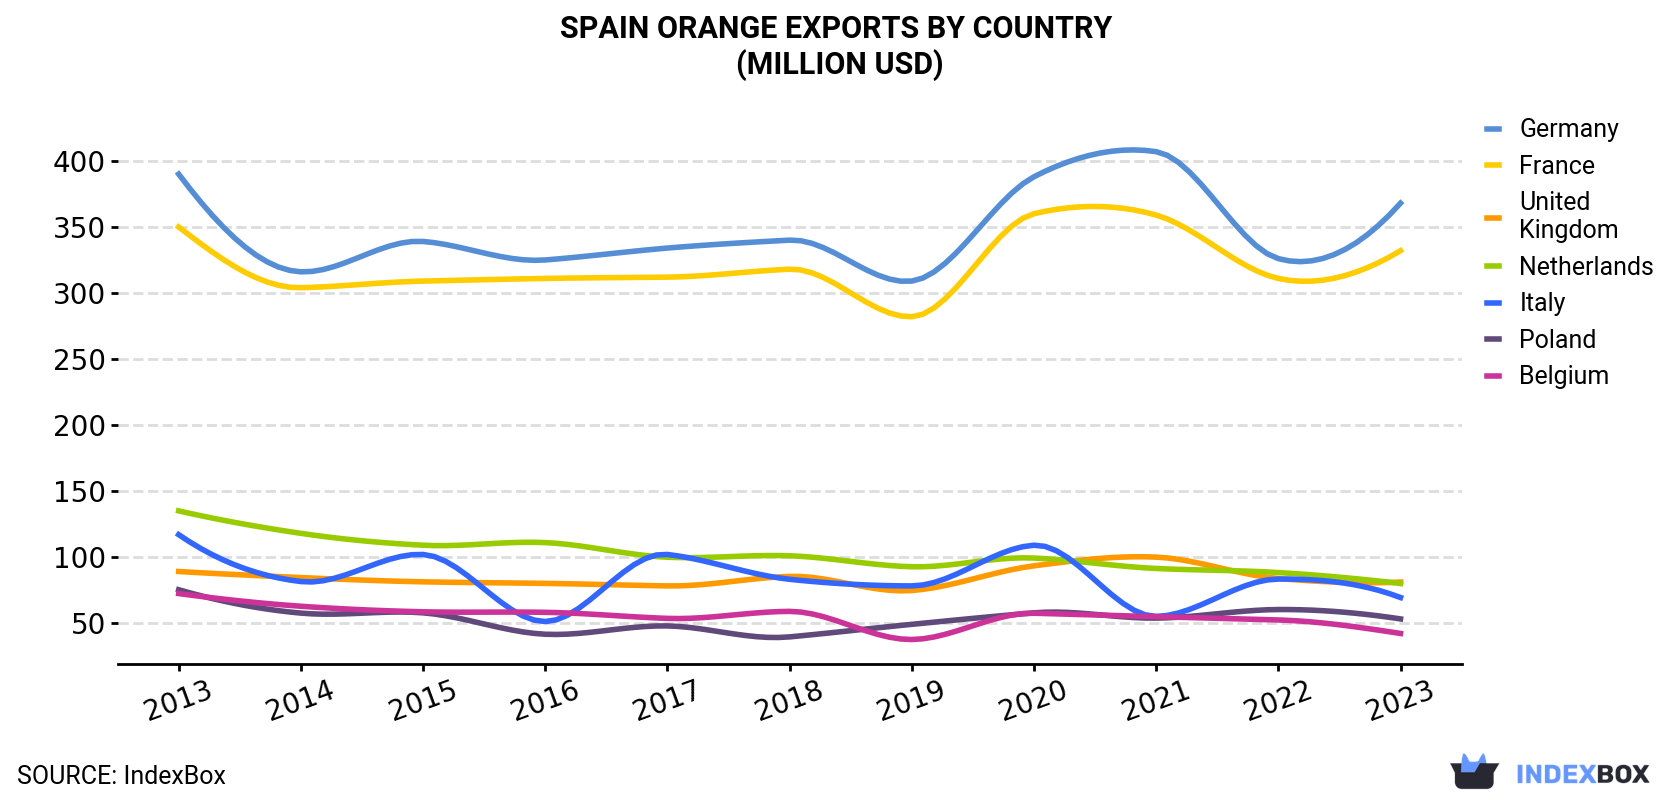 Spain Orange Exports By Country (Million USD)